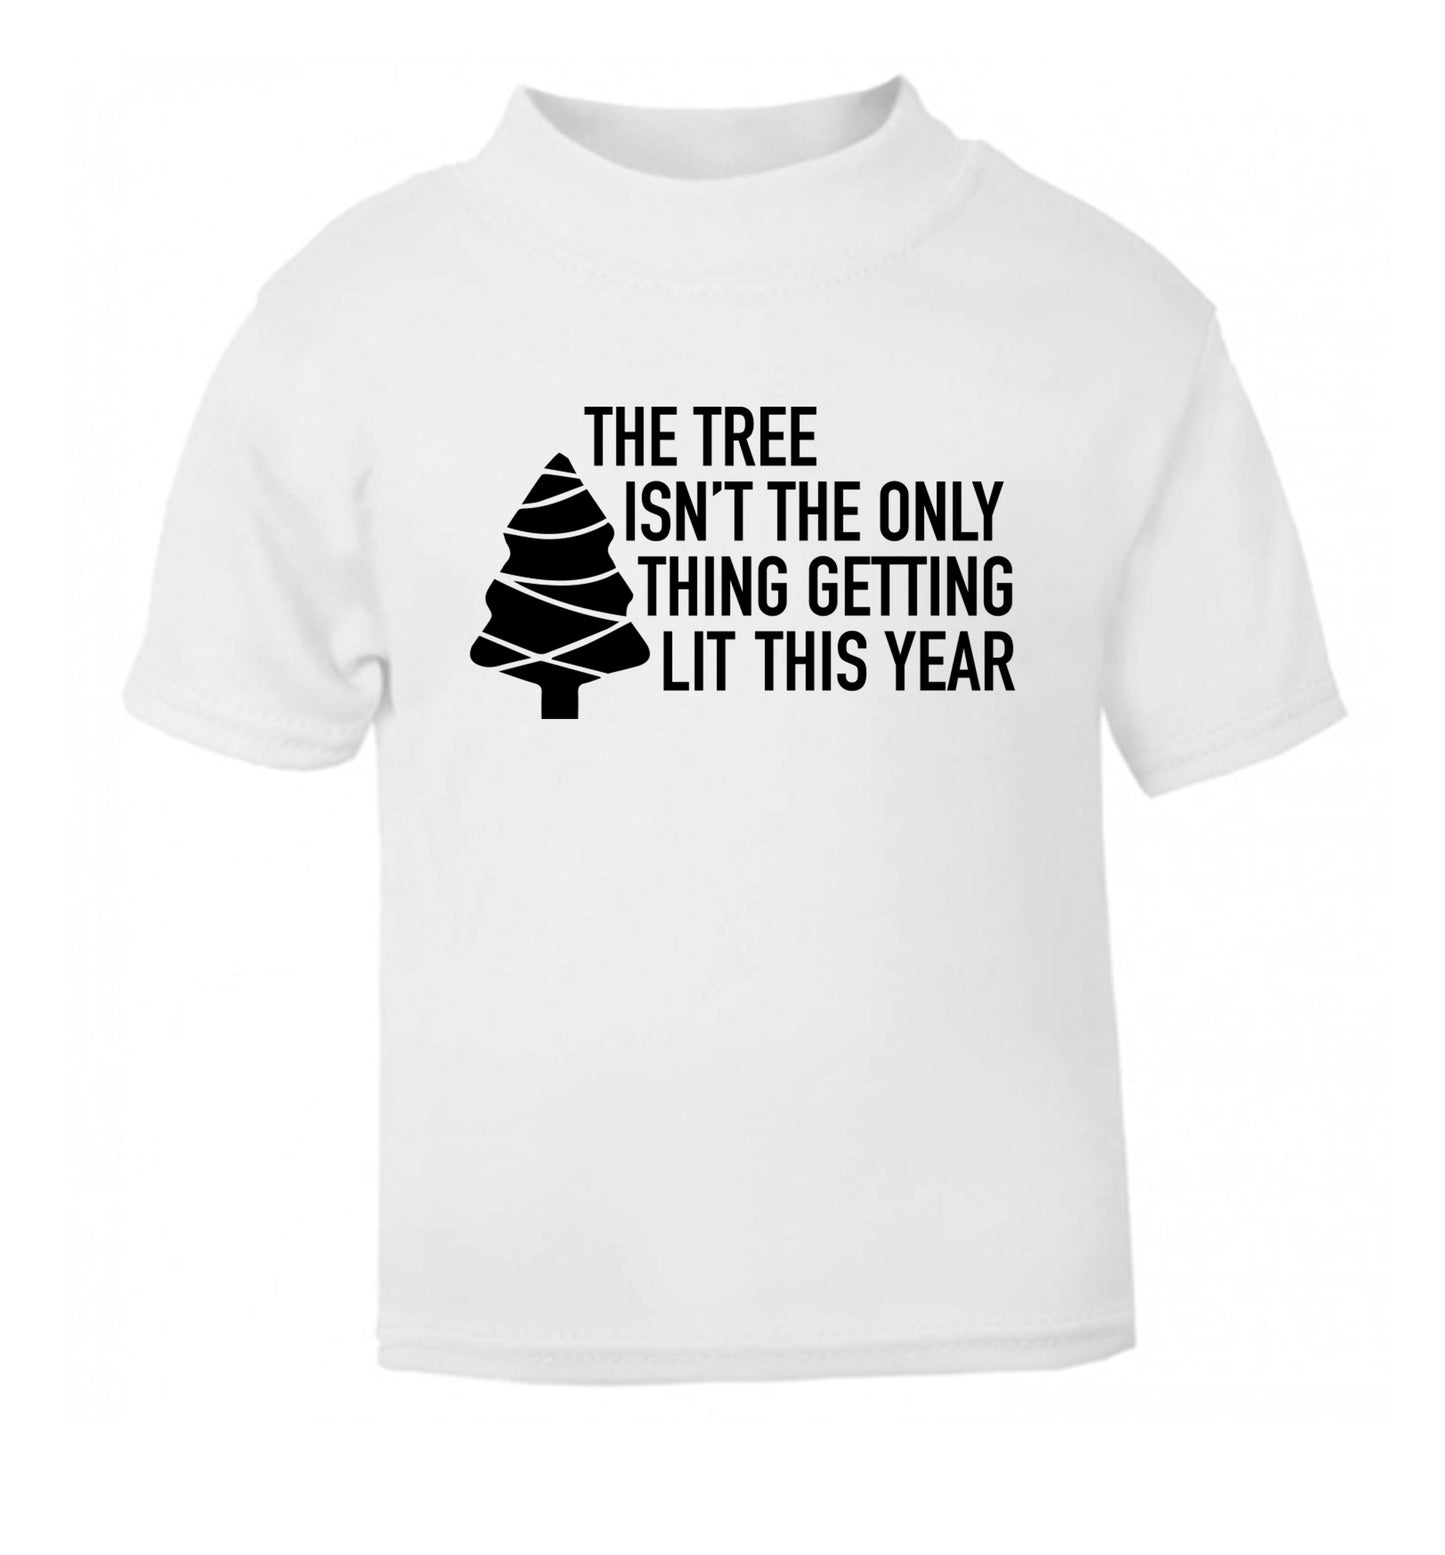 The tree isn't the only thing getting lit this year white Baby Toddler Tshirt 2 Years